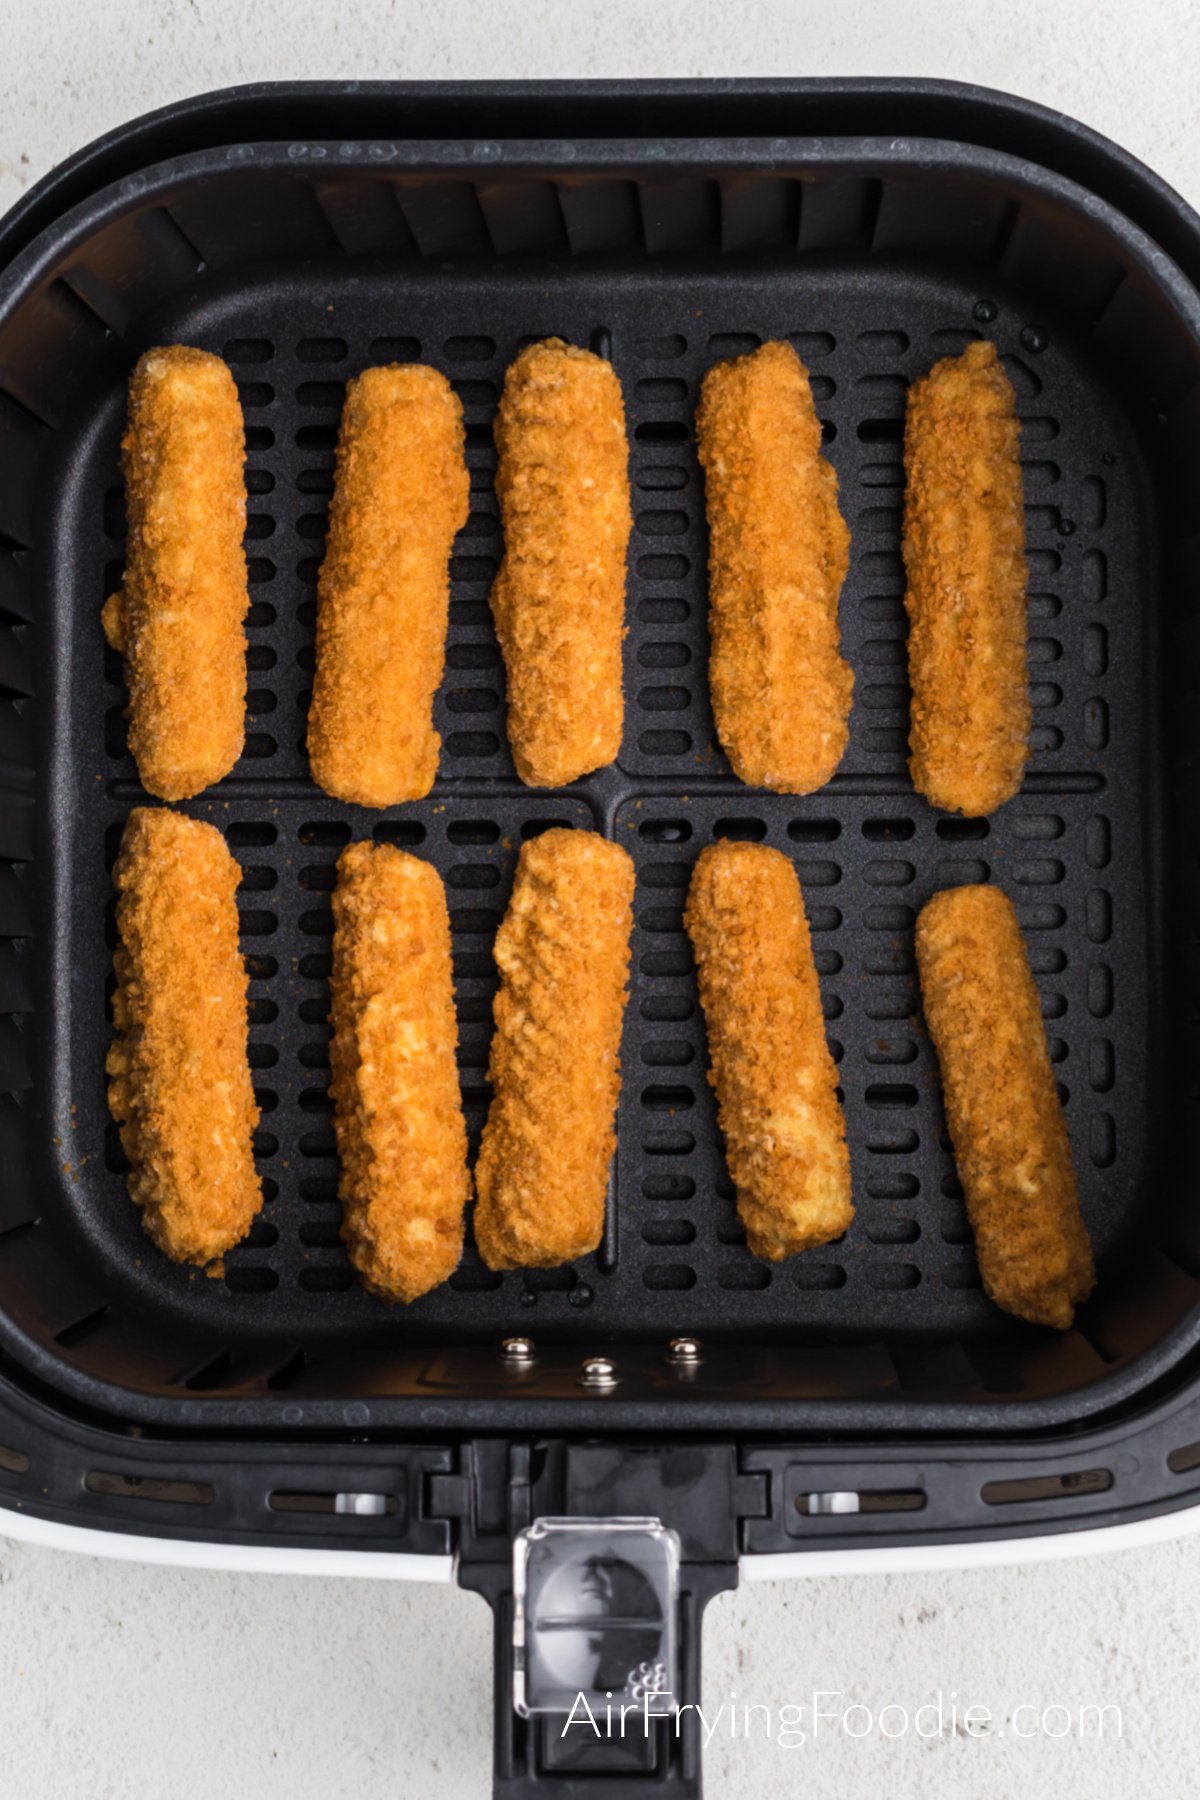 Frozen mozzarella sticks placed in a single layer in the air fryer basket ready to cook.